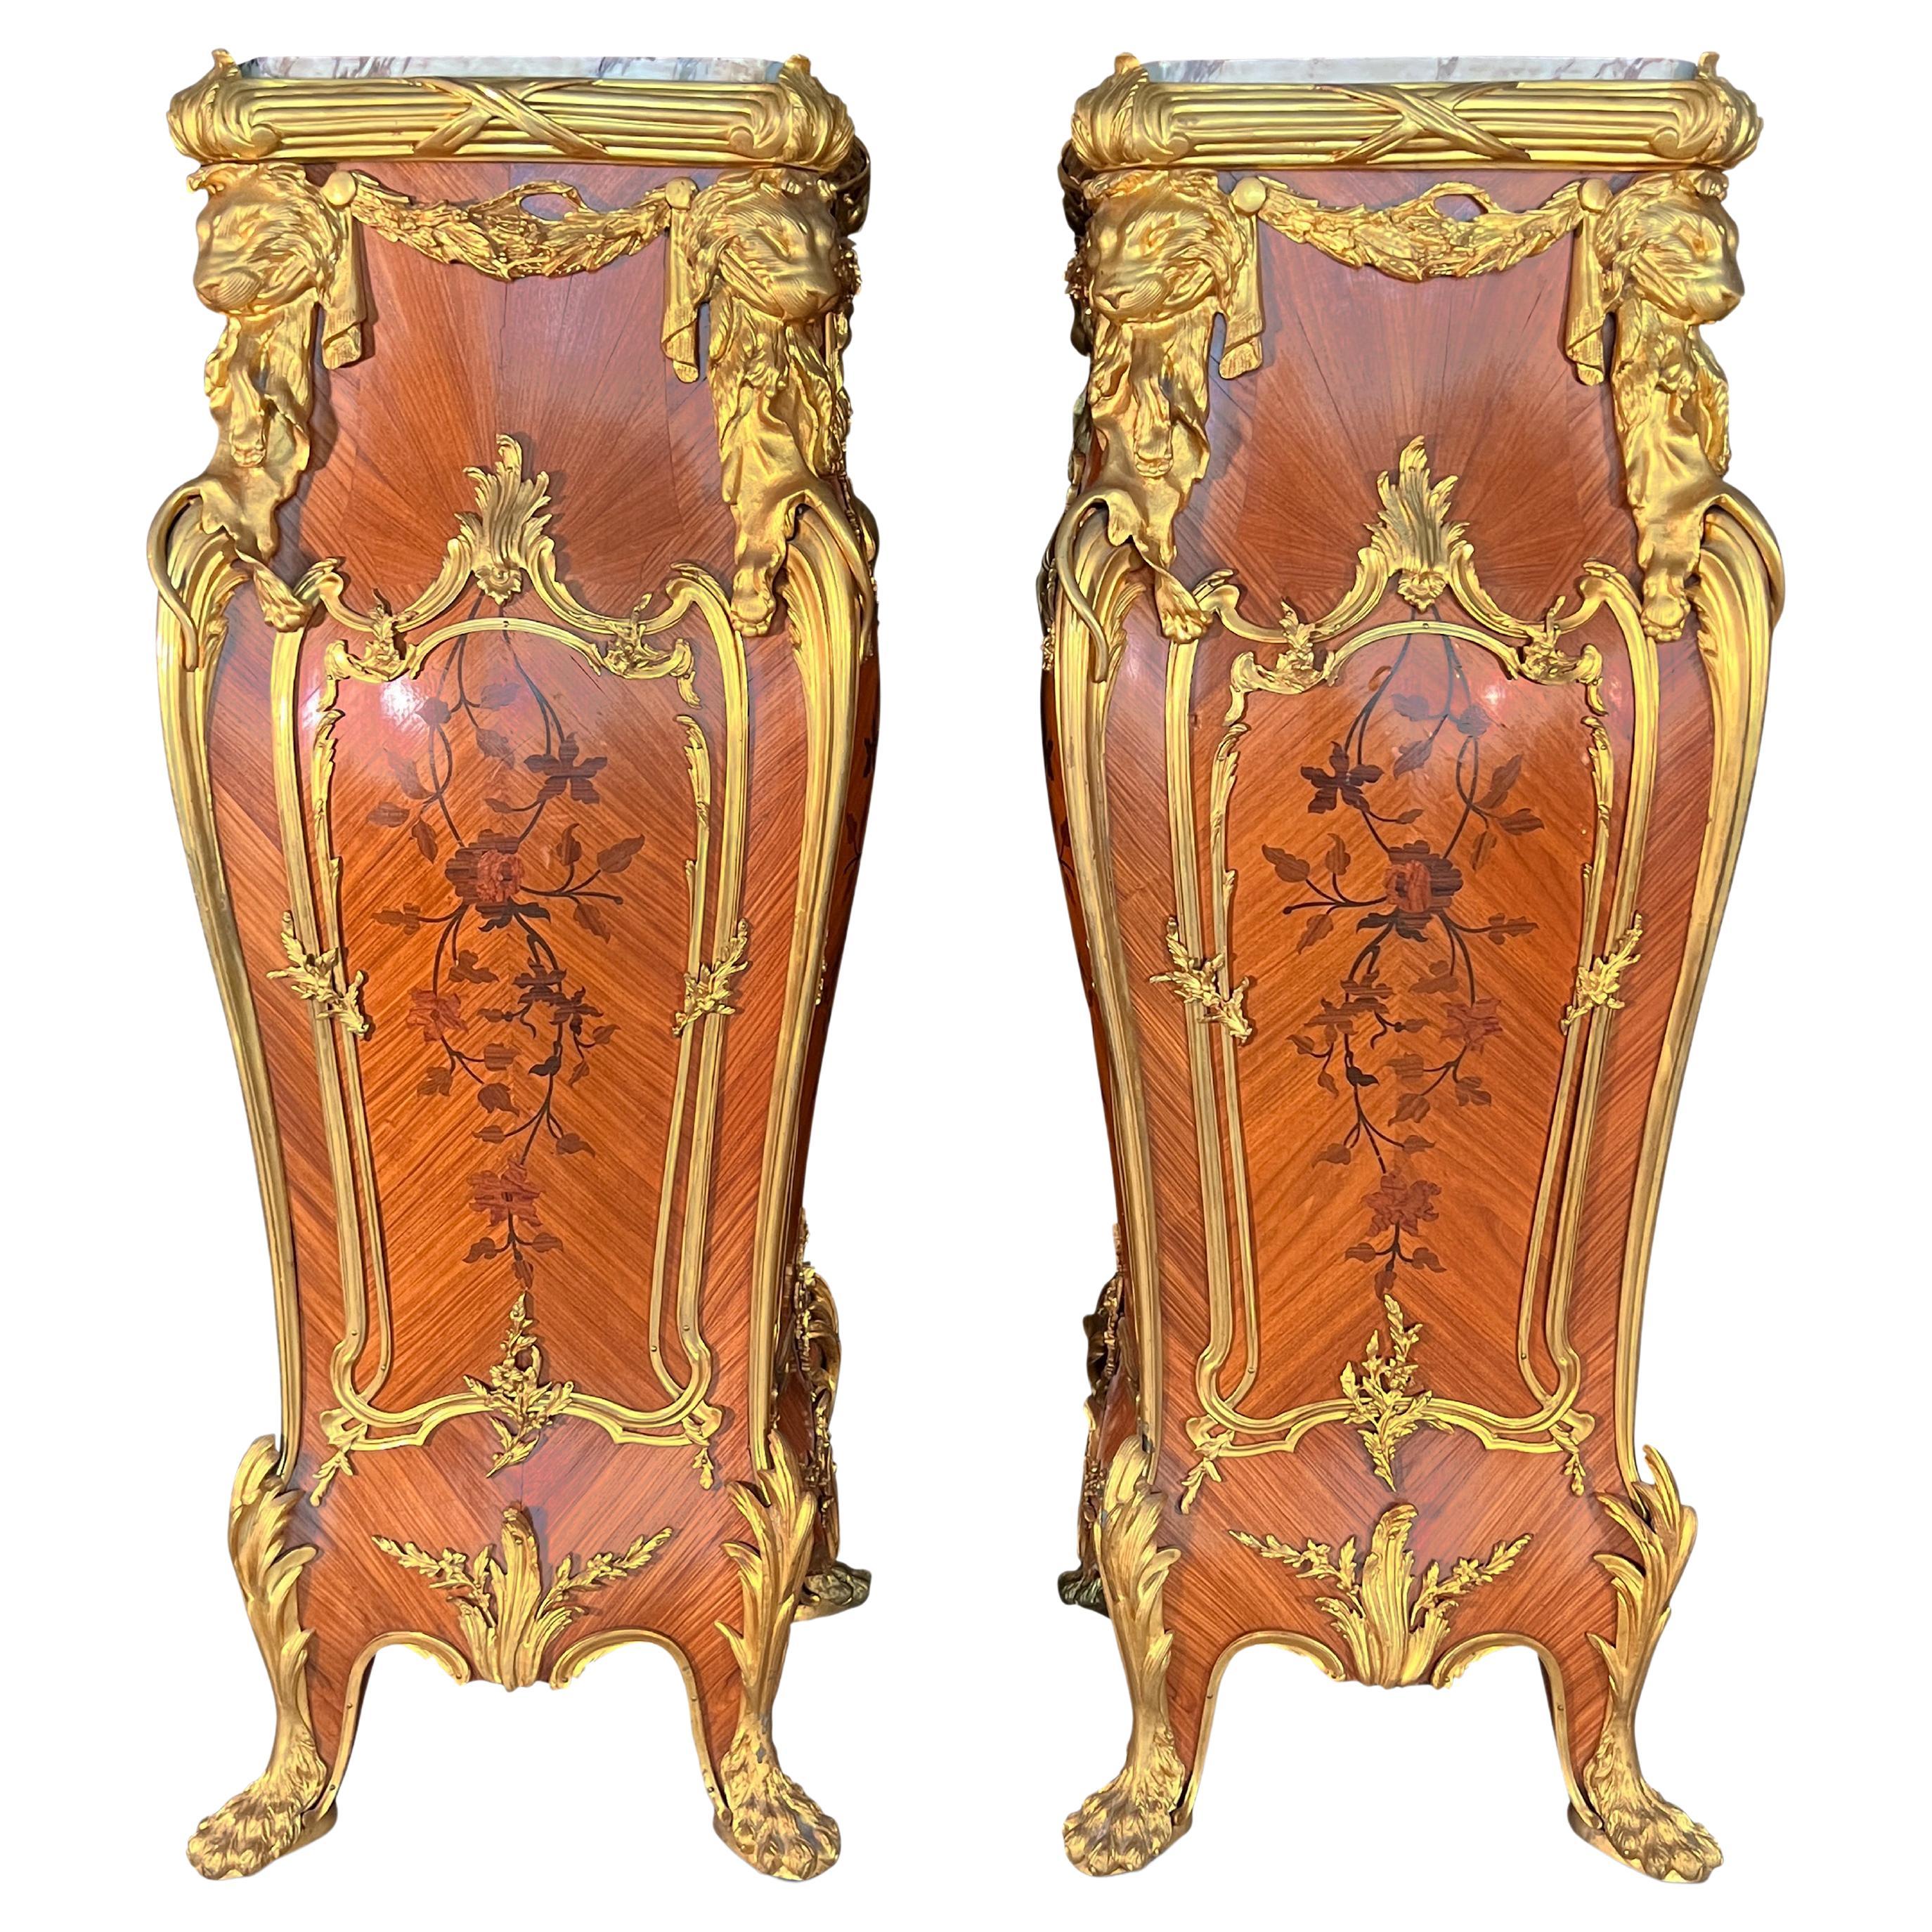 A pair of ormolu mounted marquetry pedestals. After a model by Francois Linke.
Each with a marble top above bombé sides inlaid with loose floral bouquets, the angles mounted with lion-pelts suspending laurel swags and drapery, on short